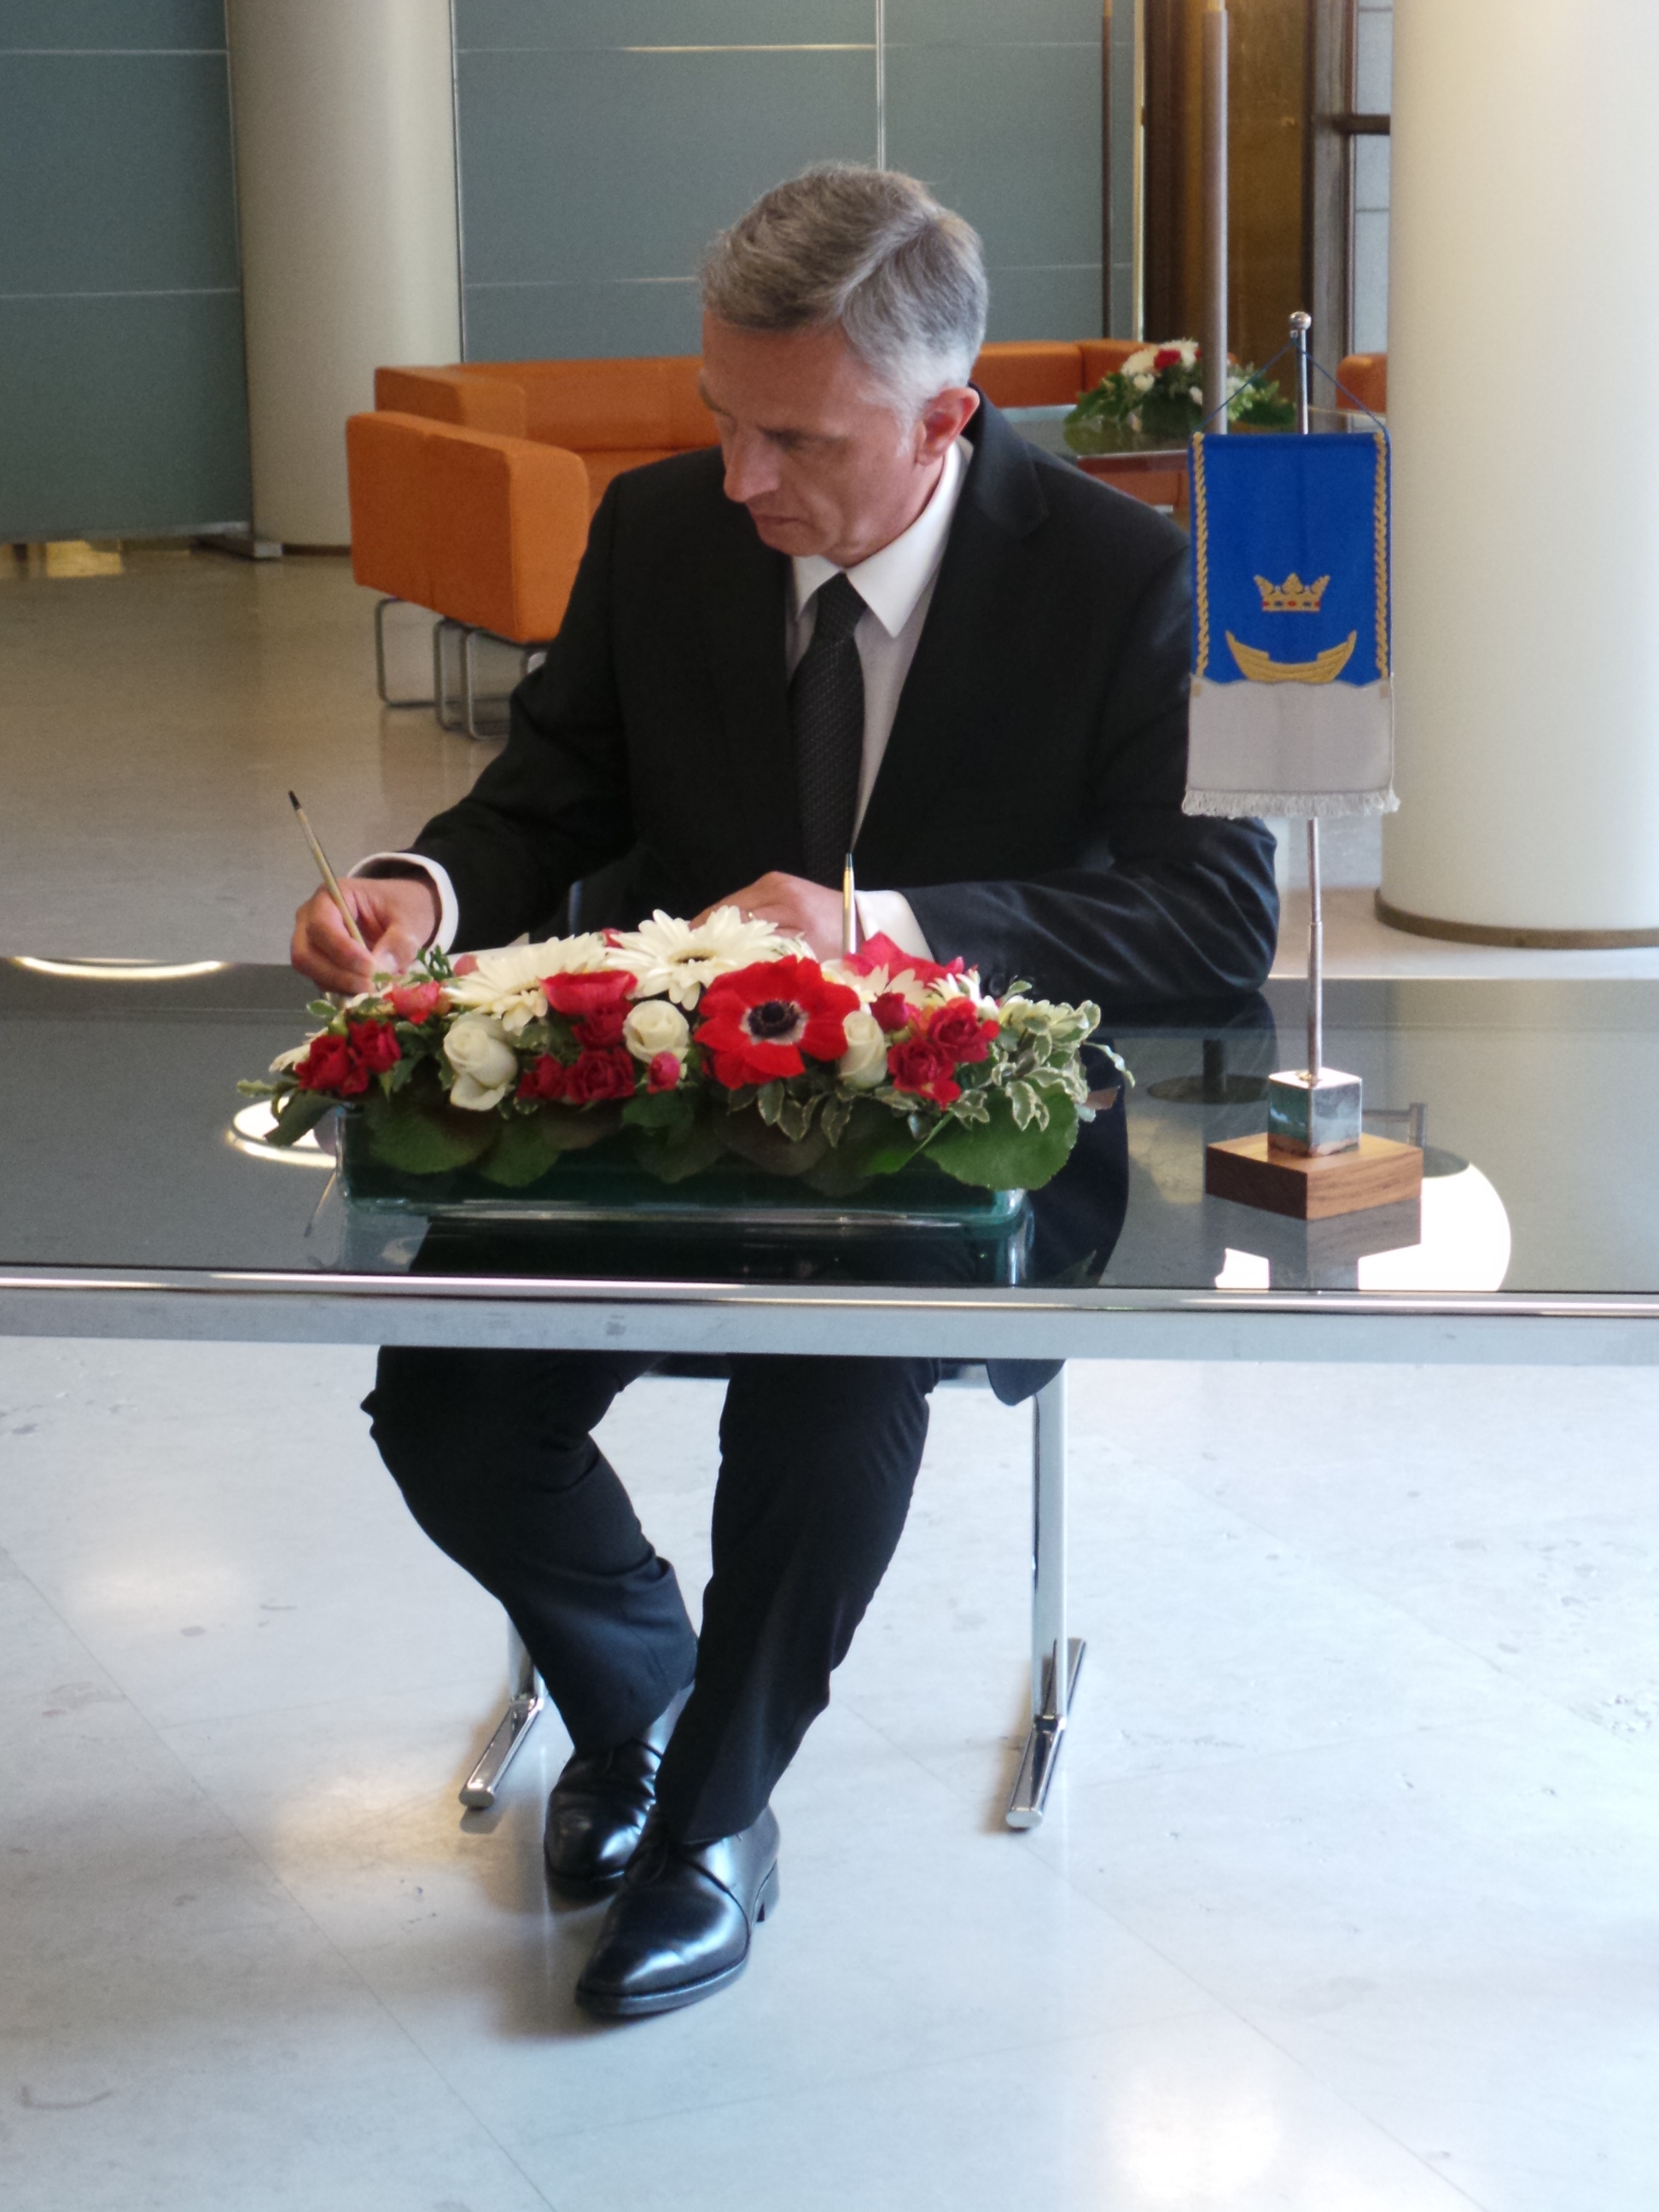 Didier Burkhalter enters his name in the Golden Book of the city of Helsinki. 